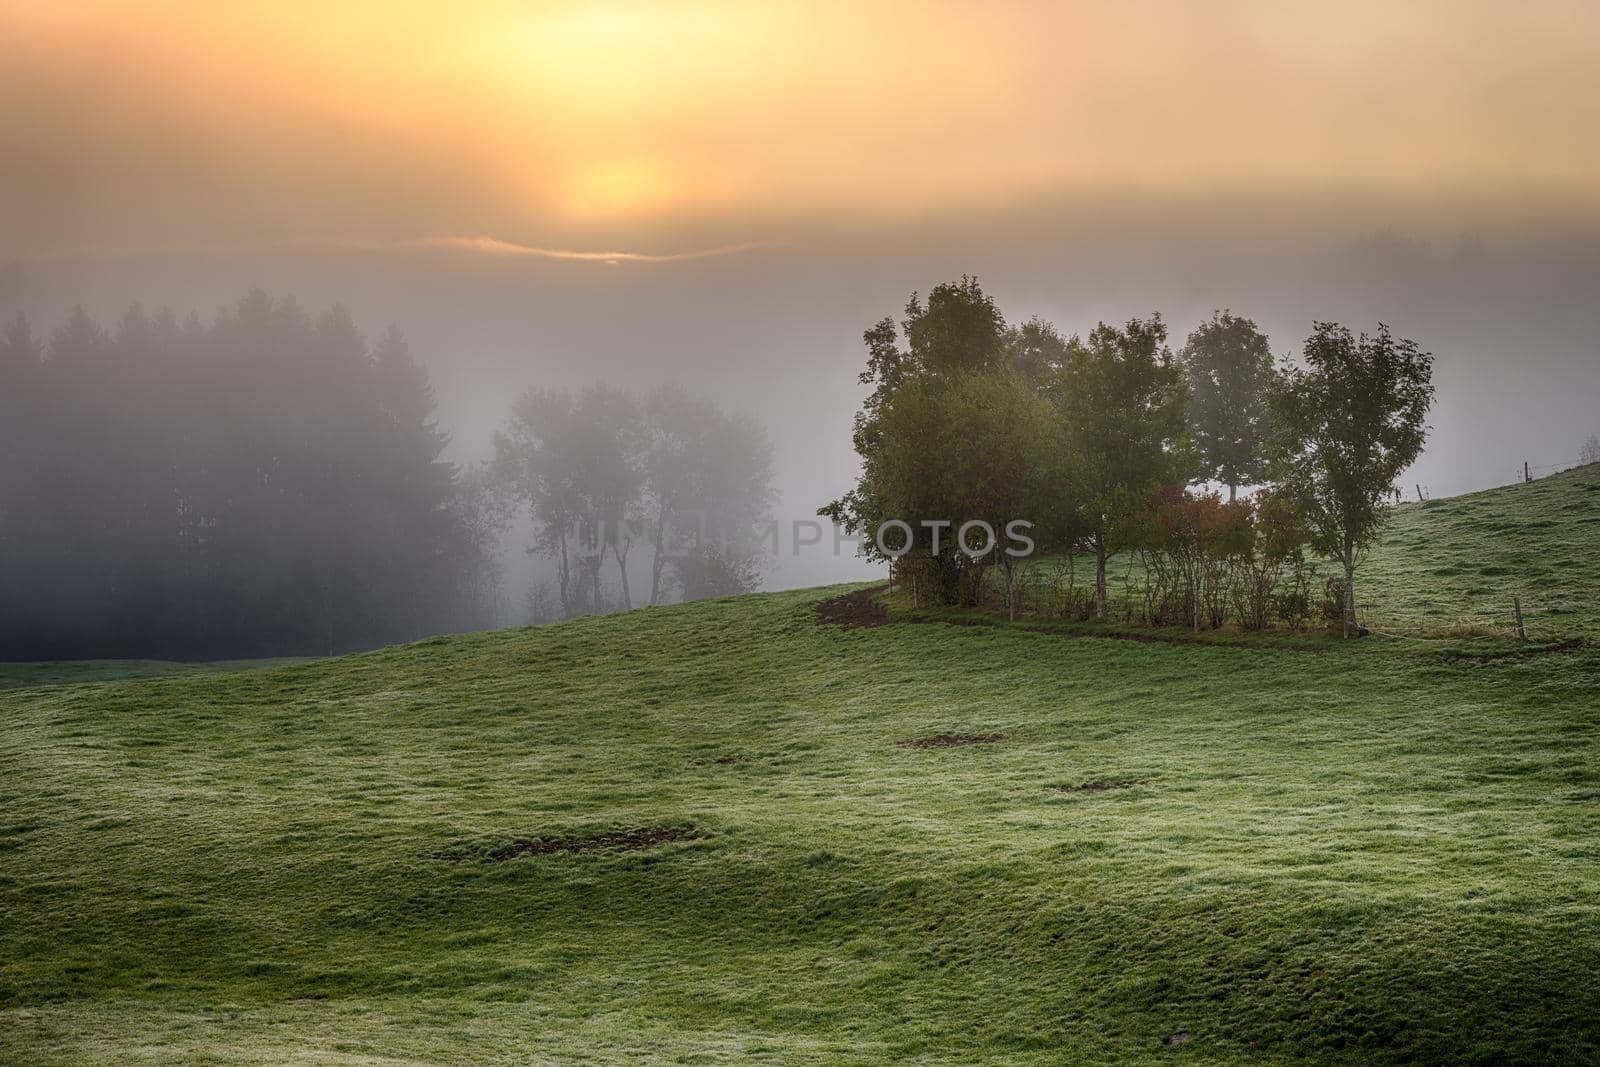 Beautiful autumn sunrise with a lot of mist seen in Bavaria, Germany